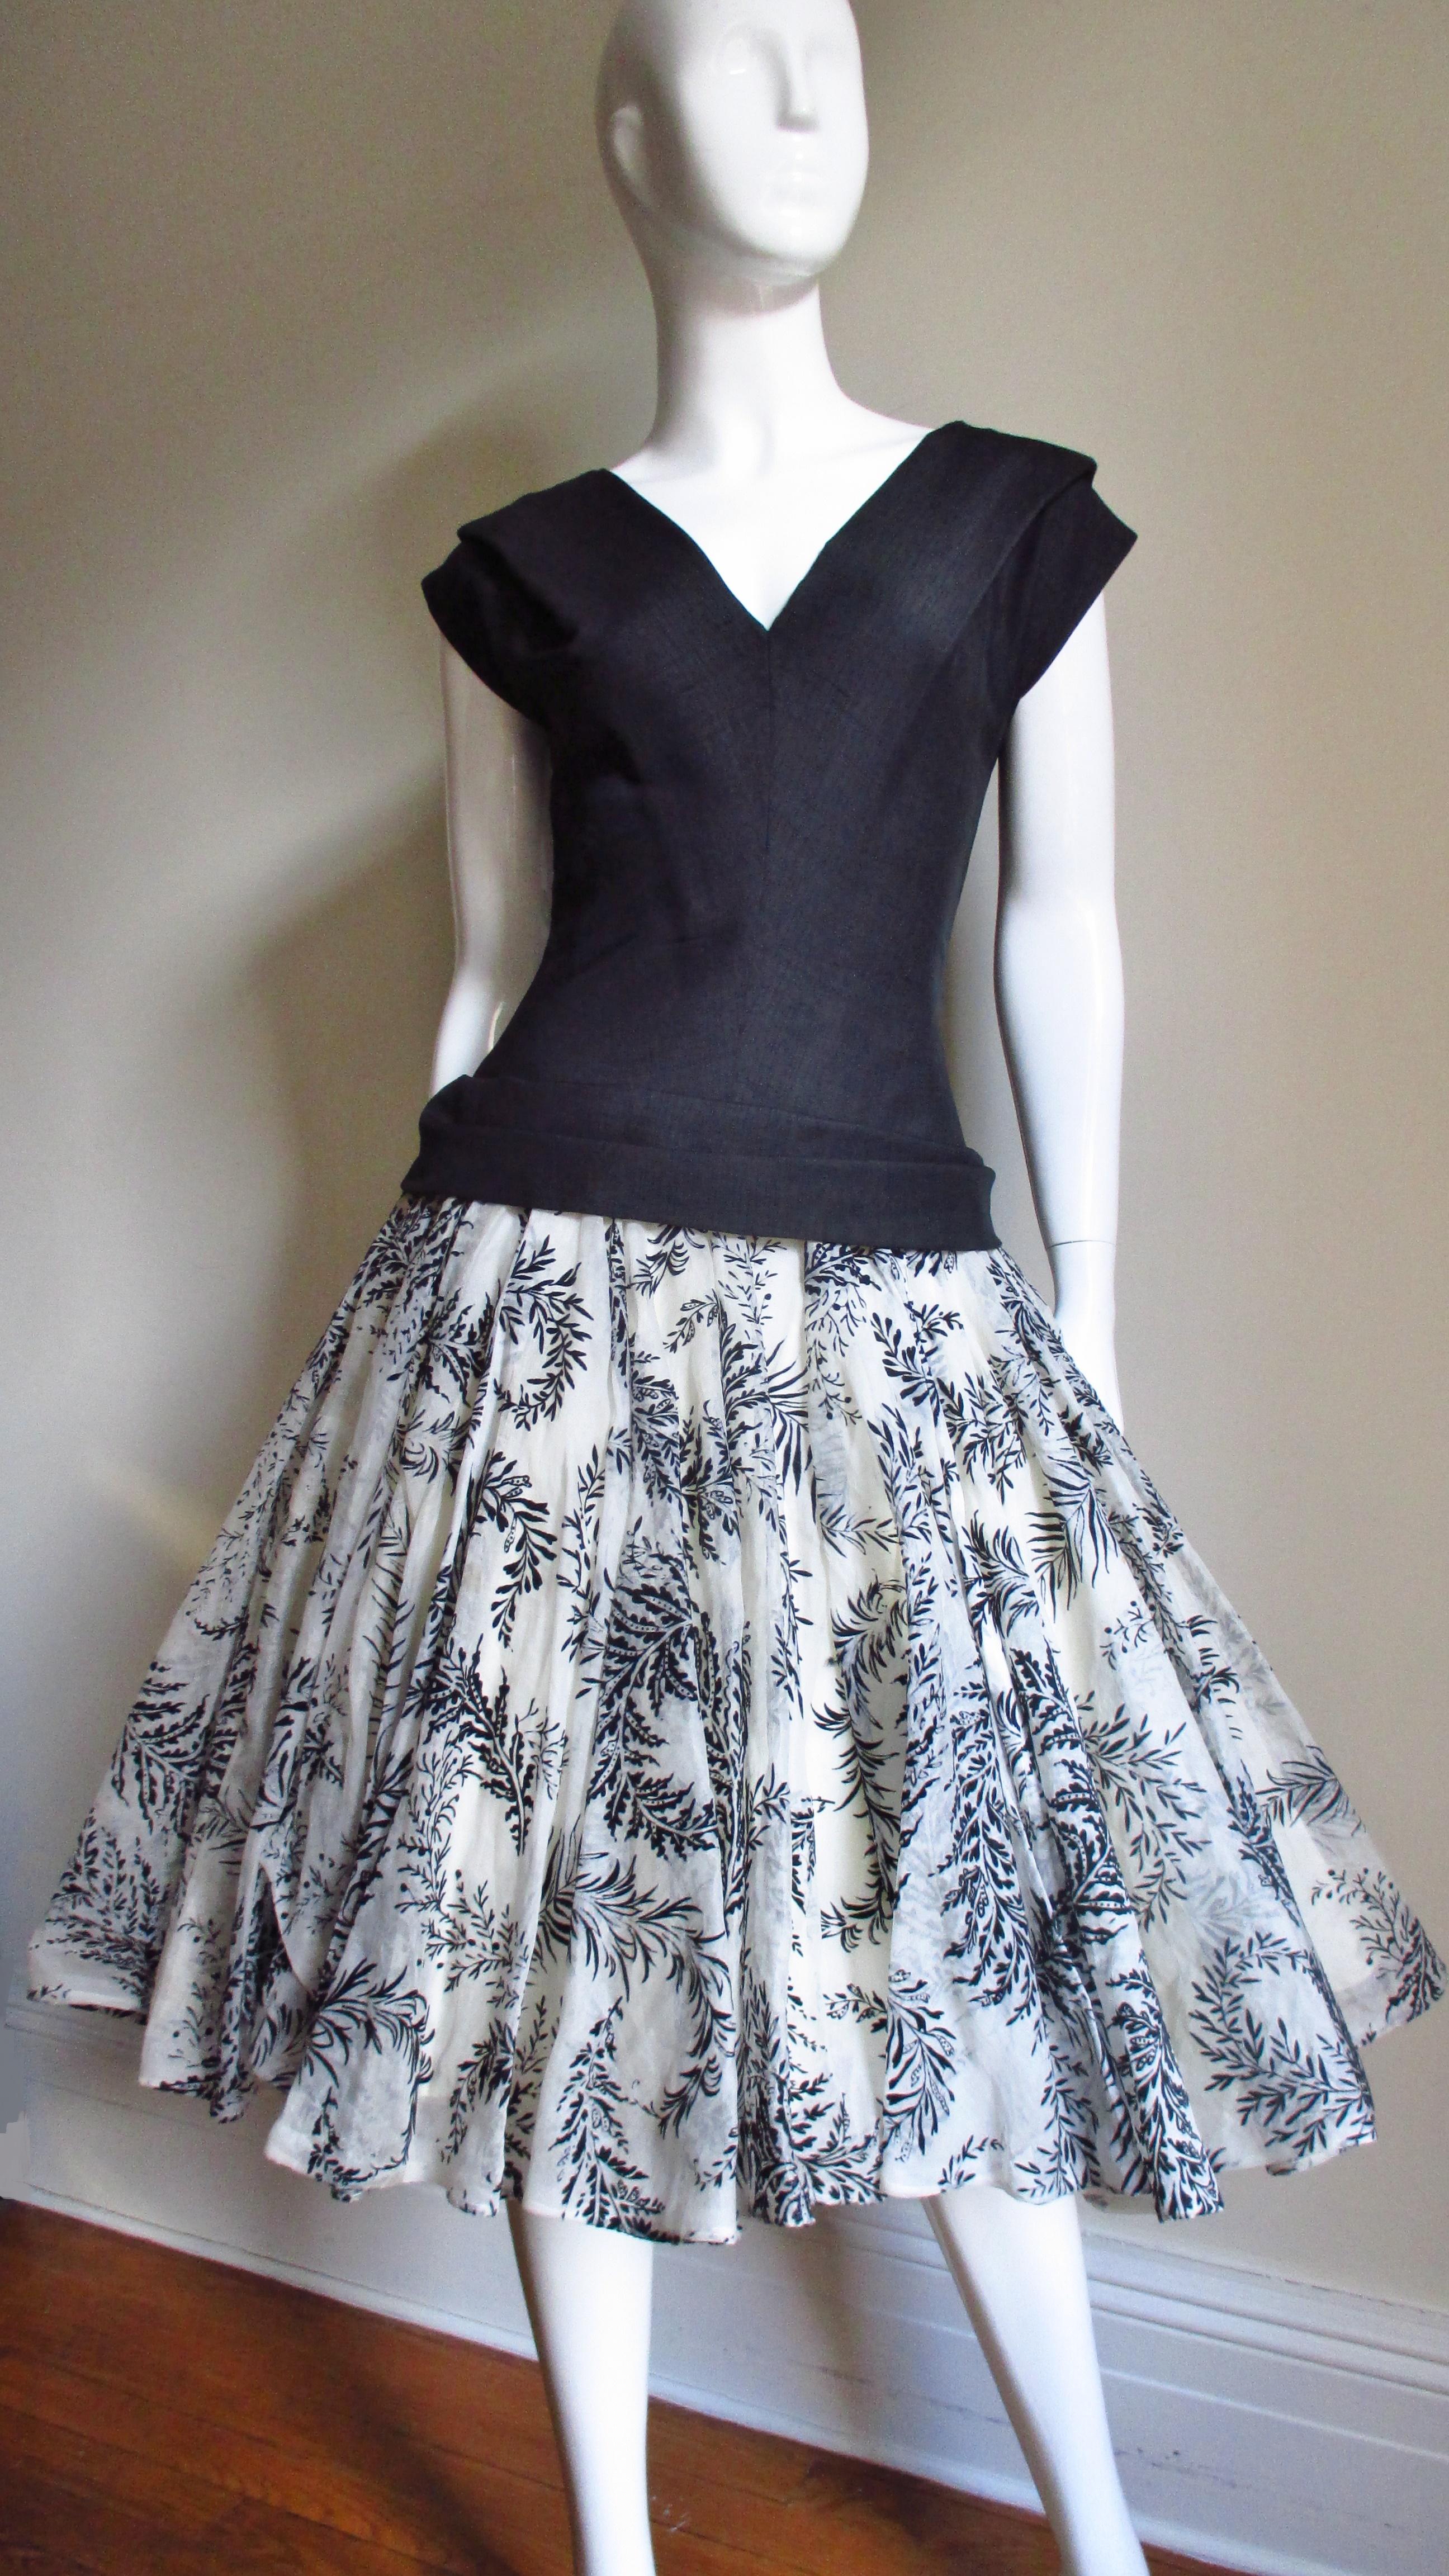 Werle 1950s Silk Dress with Full Skirt In Good Condition For Sale In Water Mill, NY